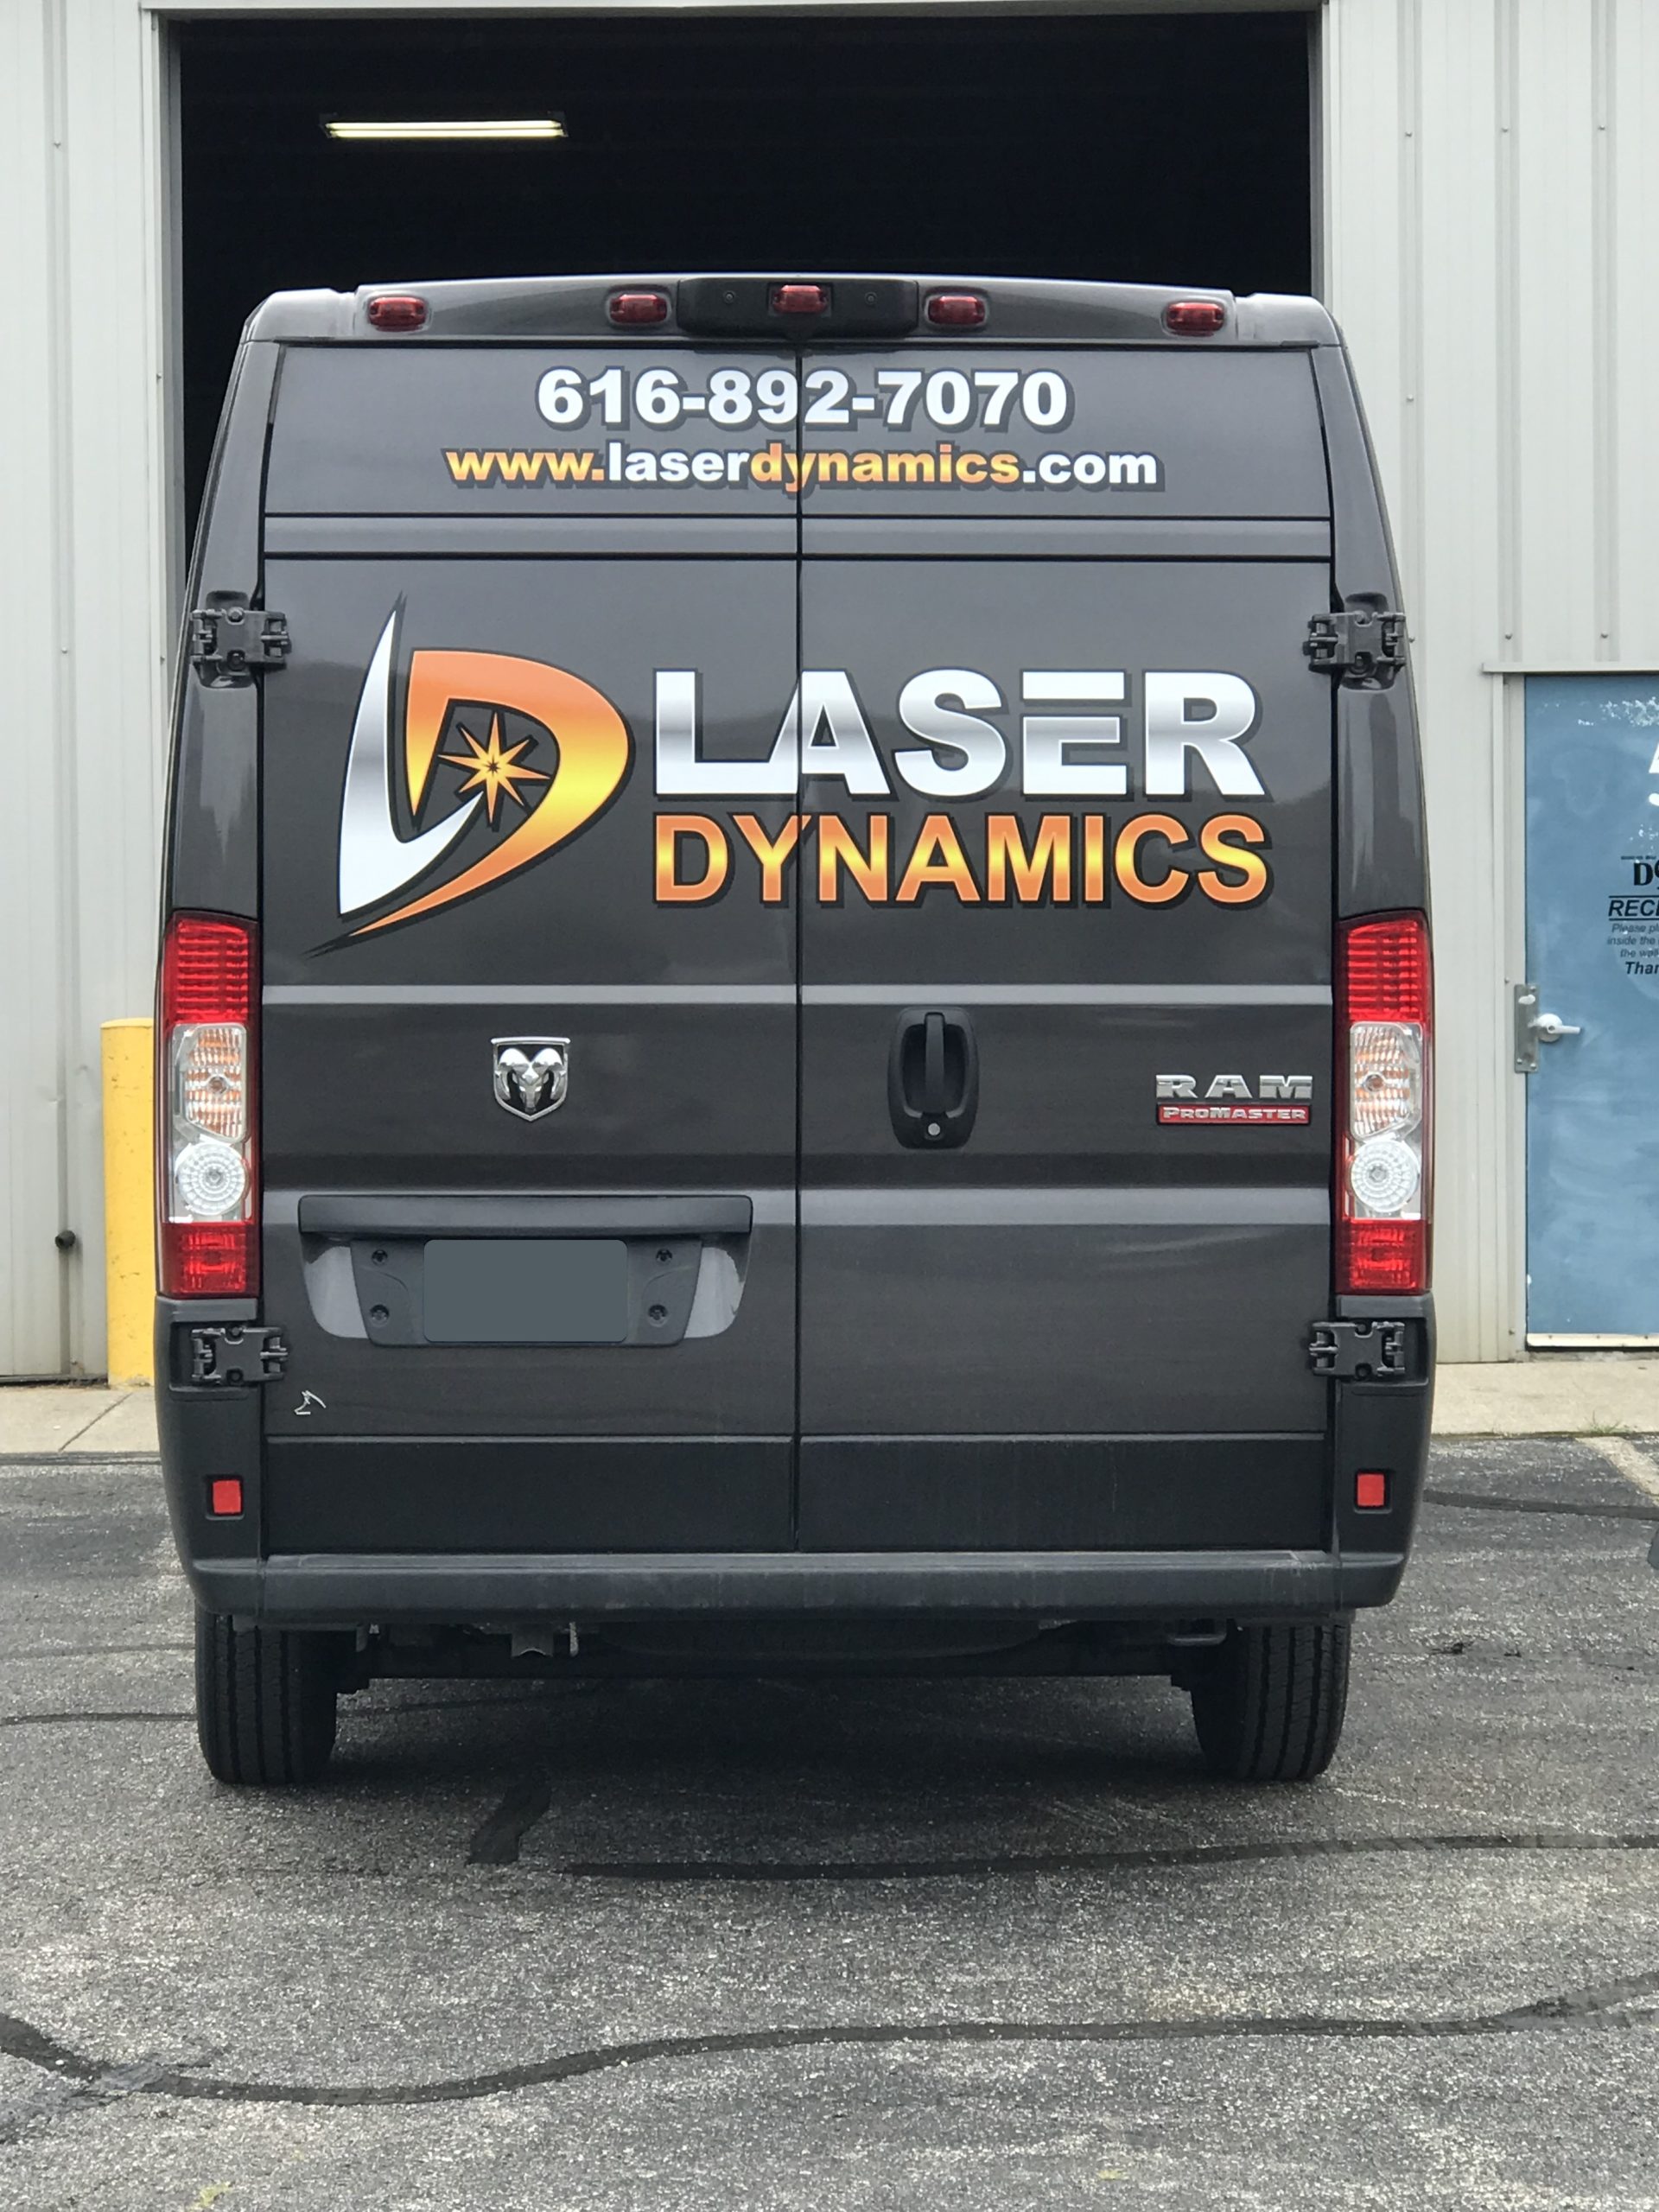 Laser Dynamics Vehicle Vinyl Lettering and Graphics